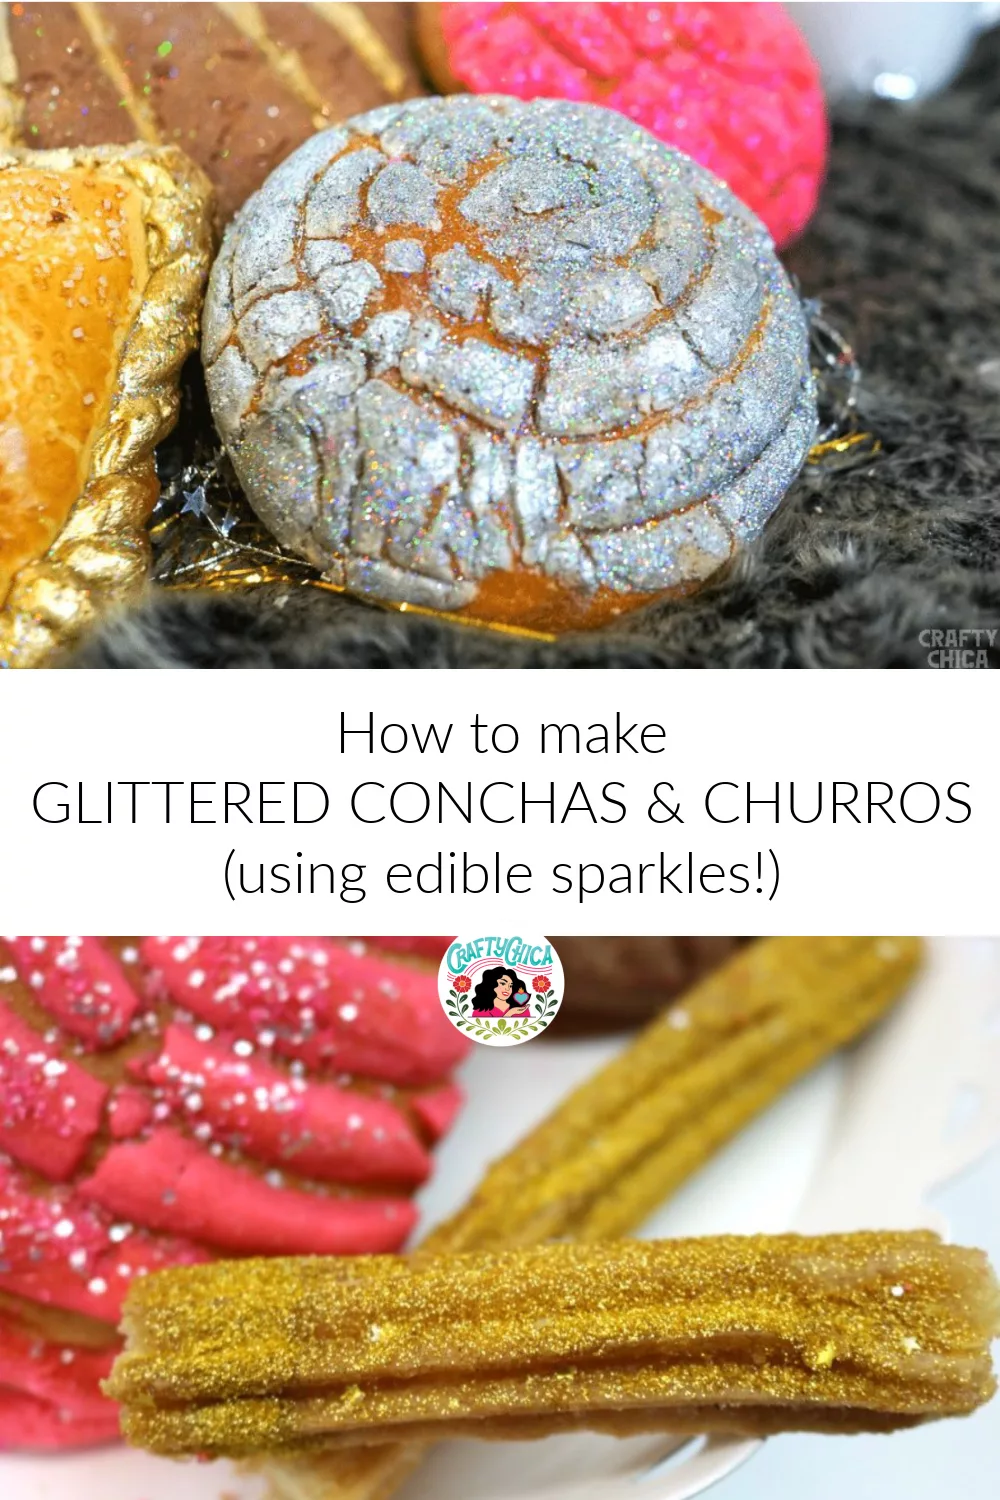 How to make glittered churros and conchas